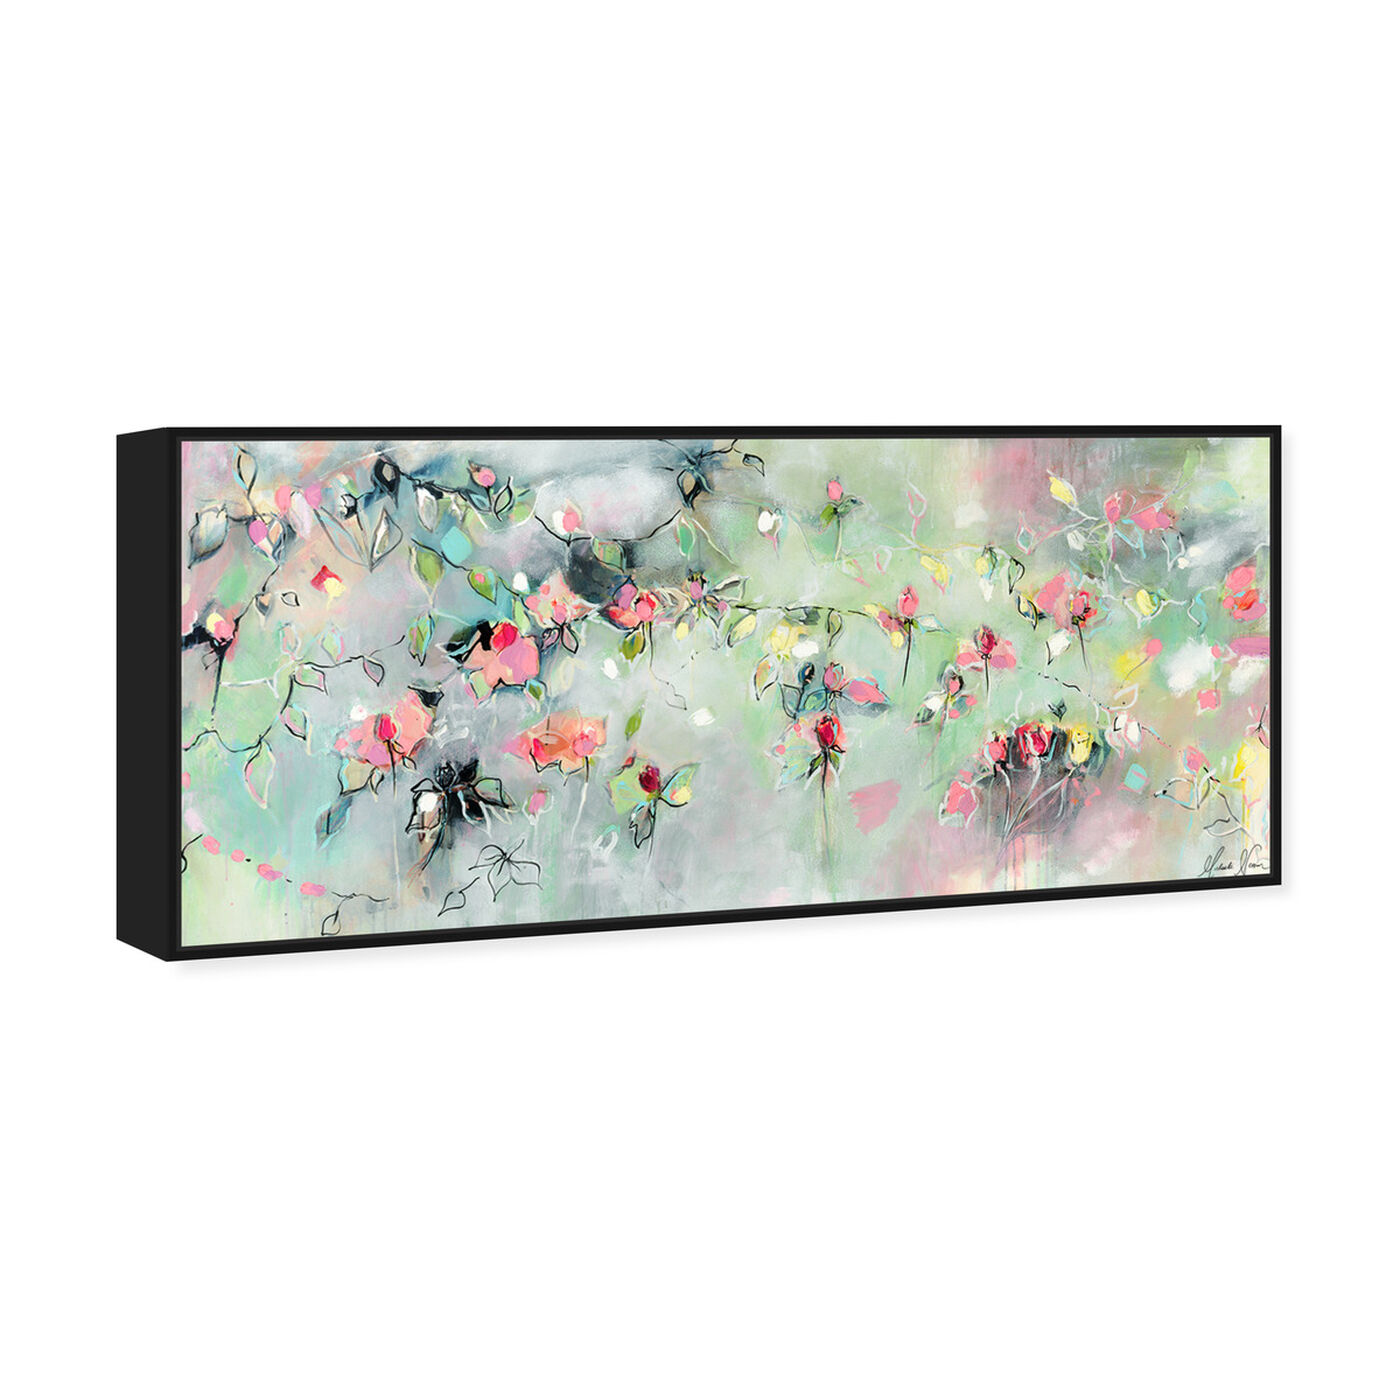 Angled view of Appear and Disappear by Michaela Nessim featuring abstract and flowers art.